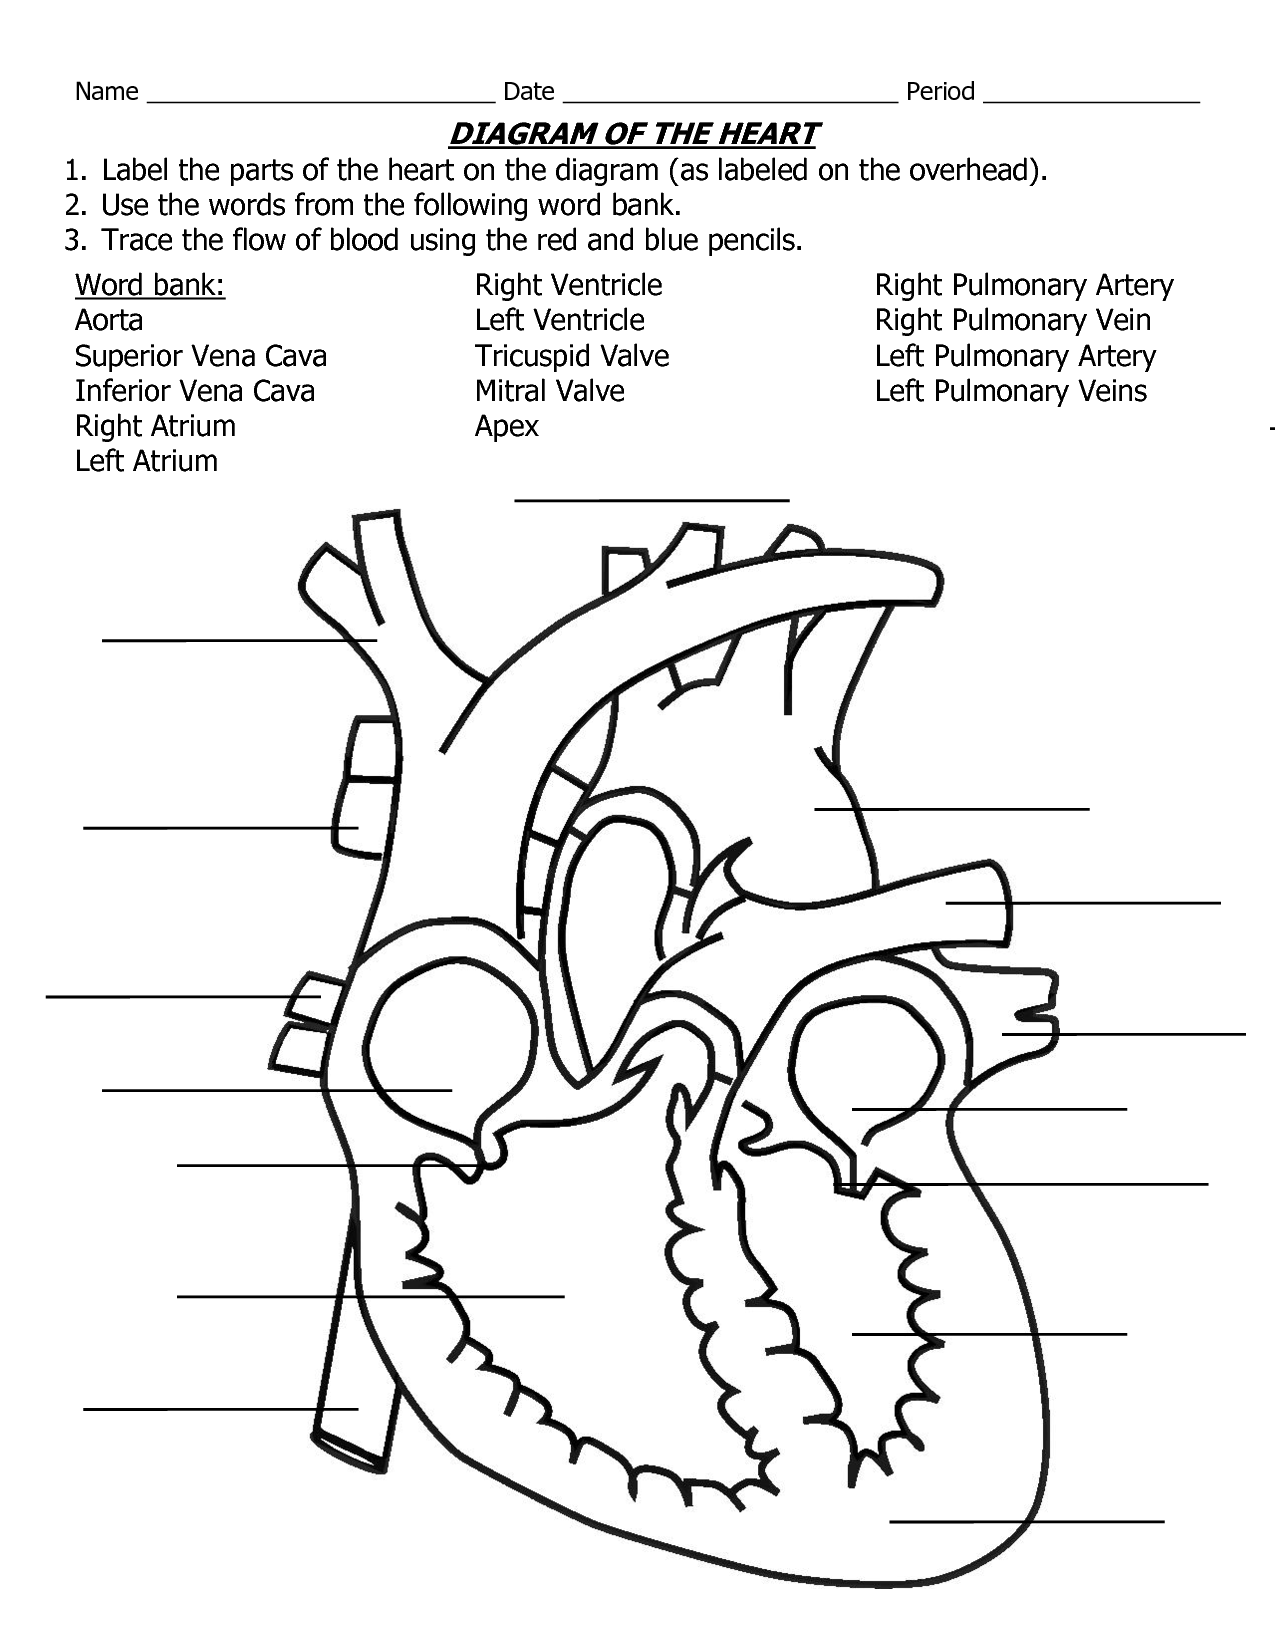 Pin By Shannon Gibson On Science Diagrams Heart Diagram Human Heart 